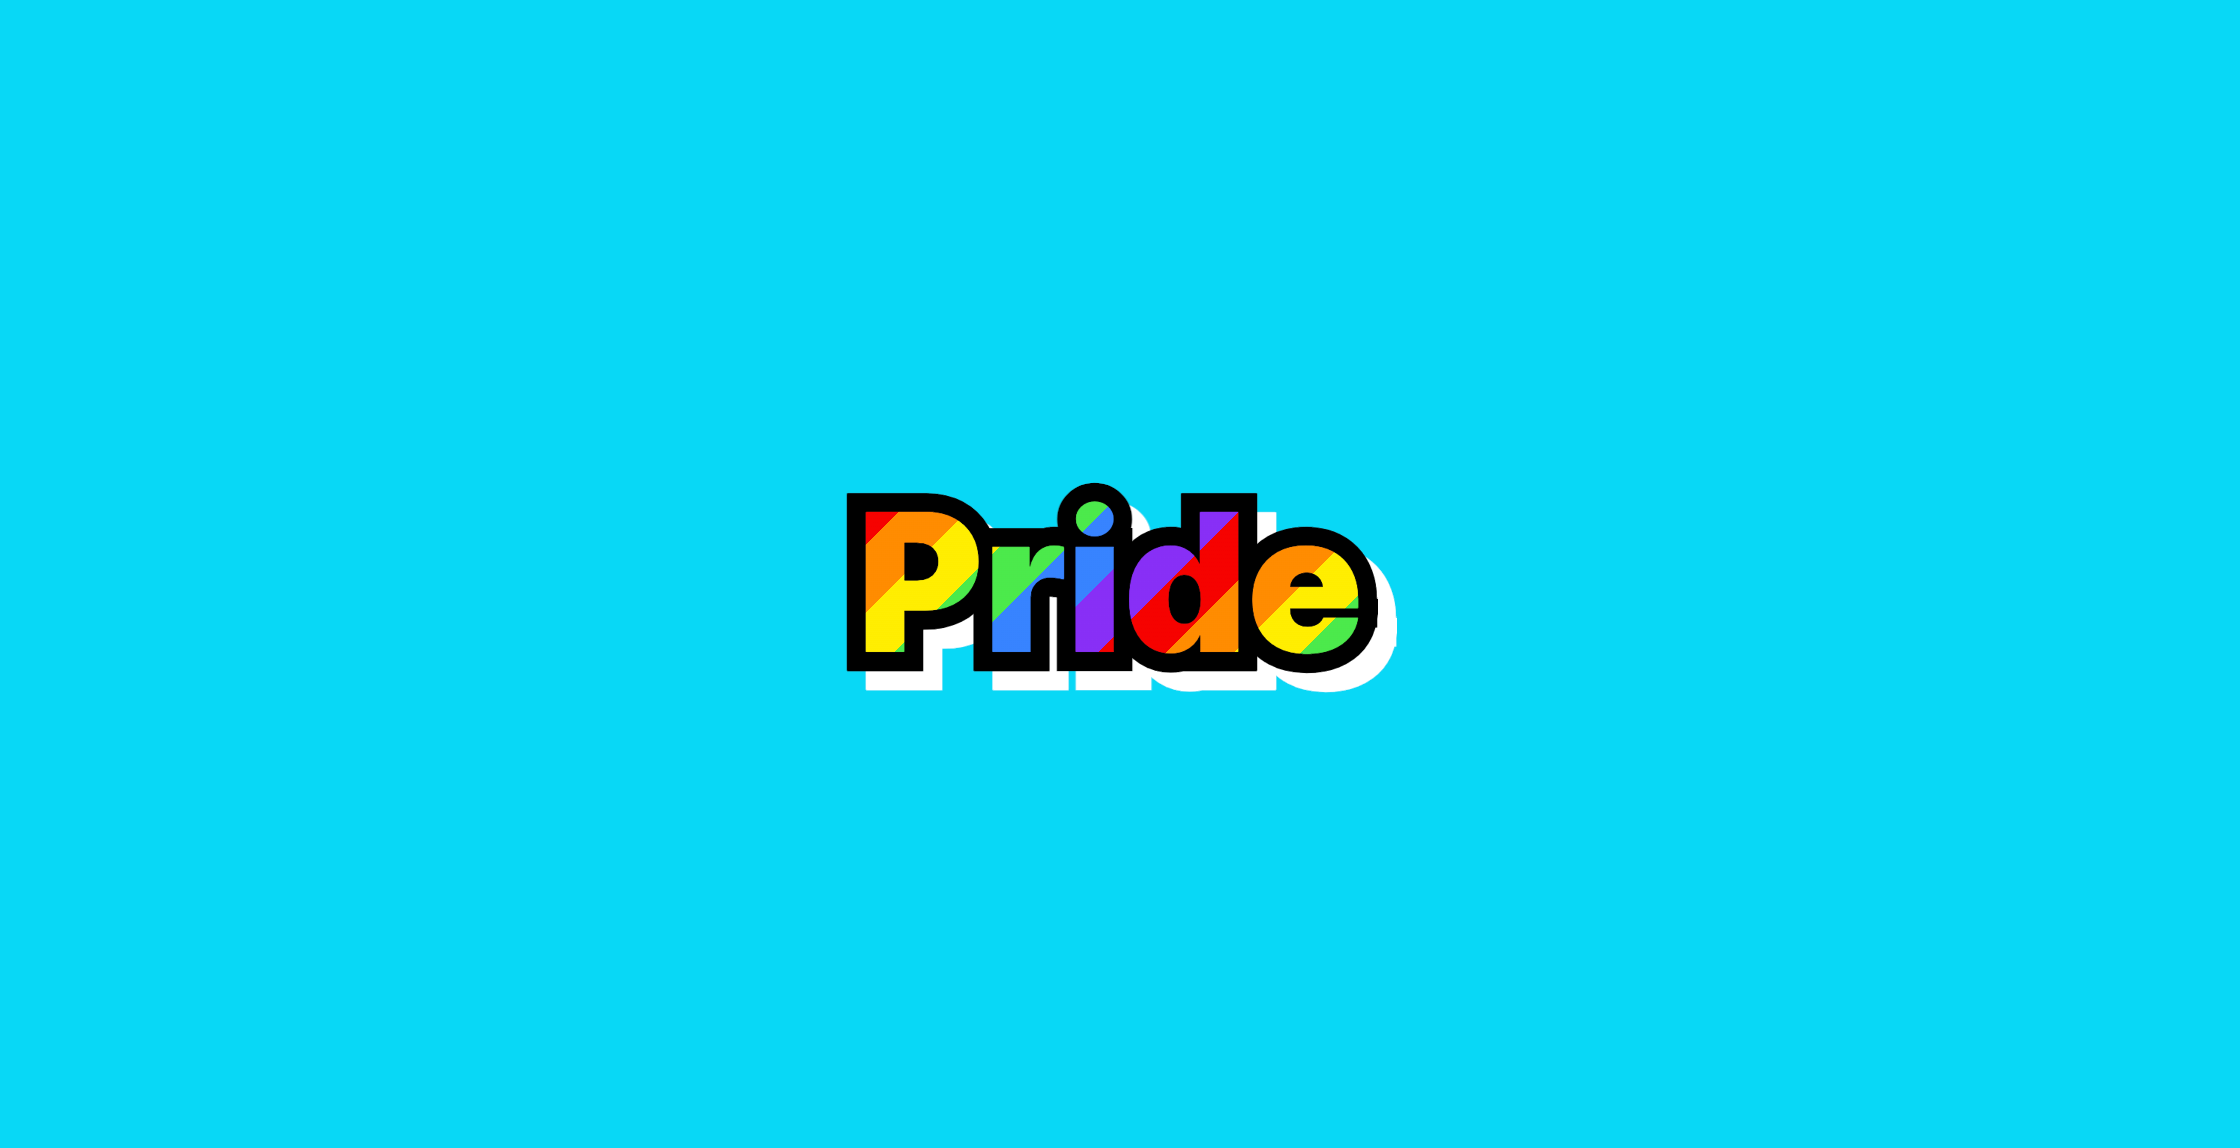 Pride Text Effect using CSS